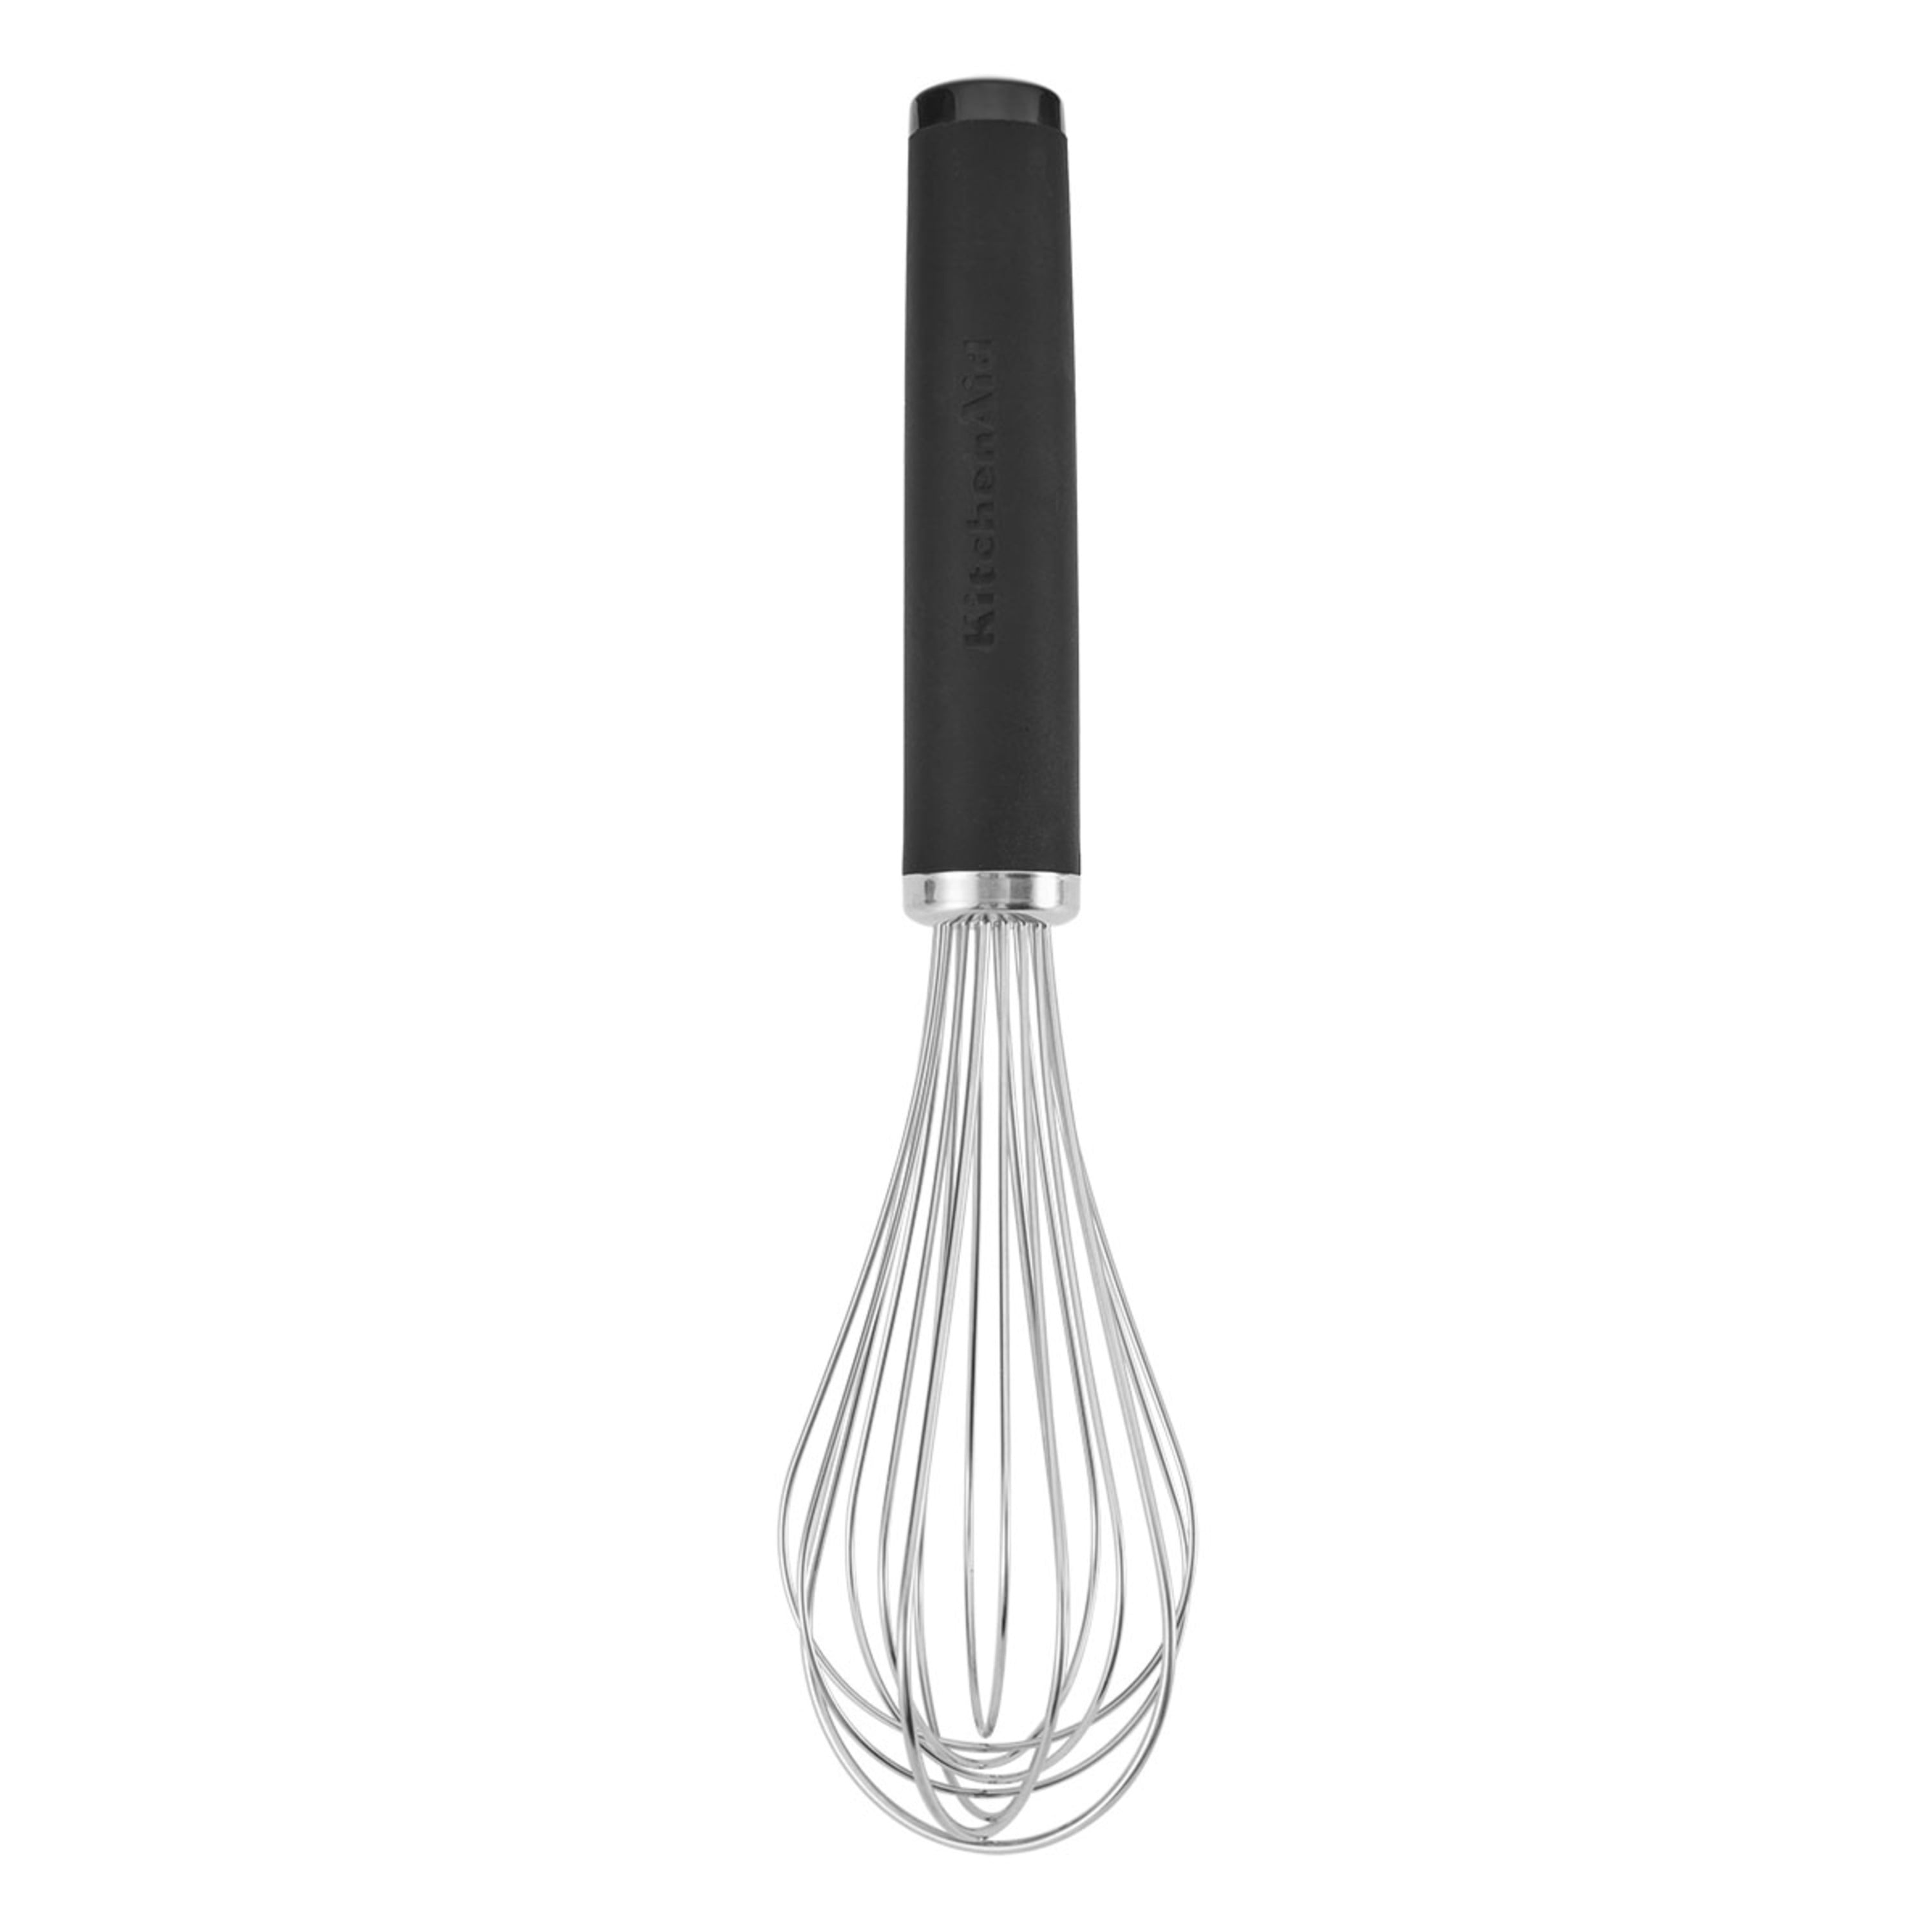  Whisk Wiper® - Wipe a Whisk Easily - Multipurpose Kitchen Tool,  Made In USA - Includes 11 Stainless-Steel Whisk - Cool Baking Gadget, A  Great Gift For Men and Women (Color